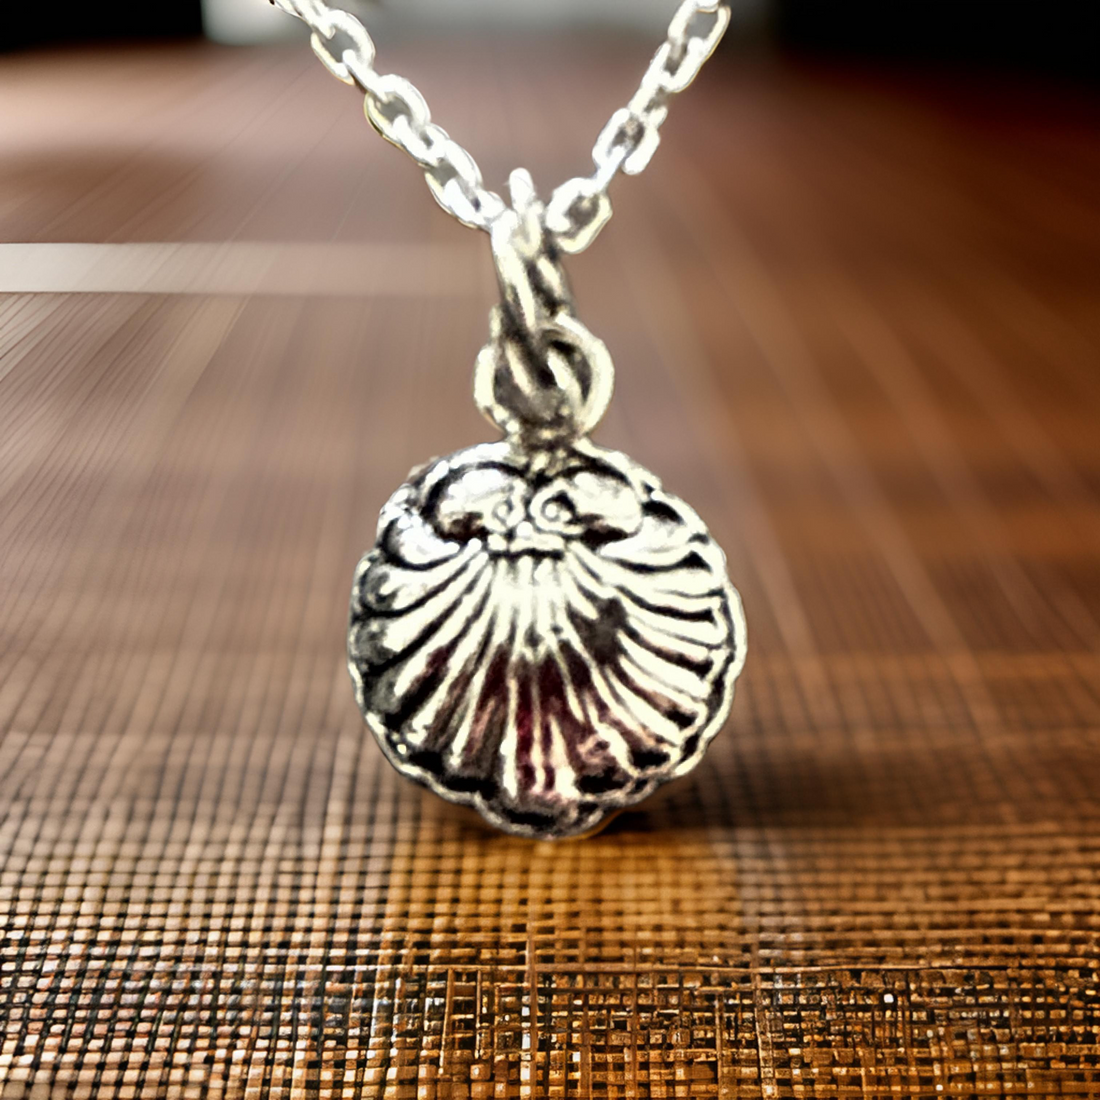 Handmade Sterling Silver Shell Necklace- Canadian Artisan Crafted